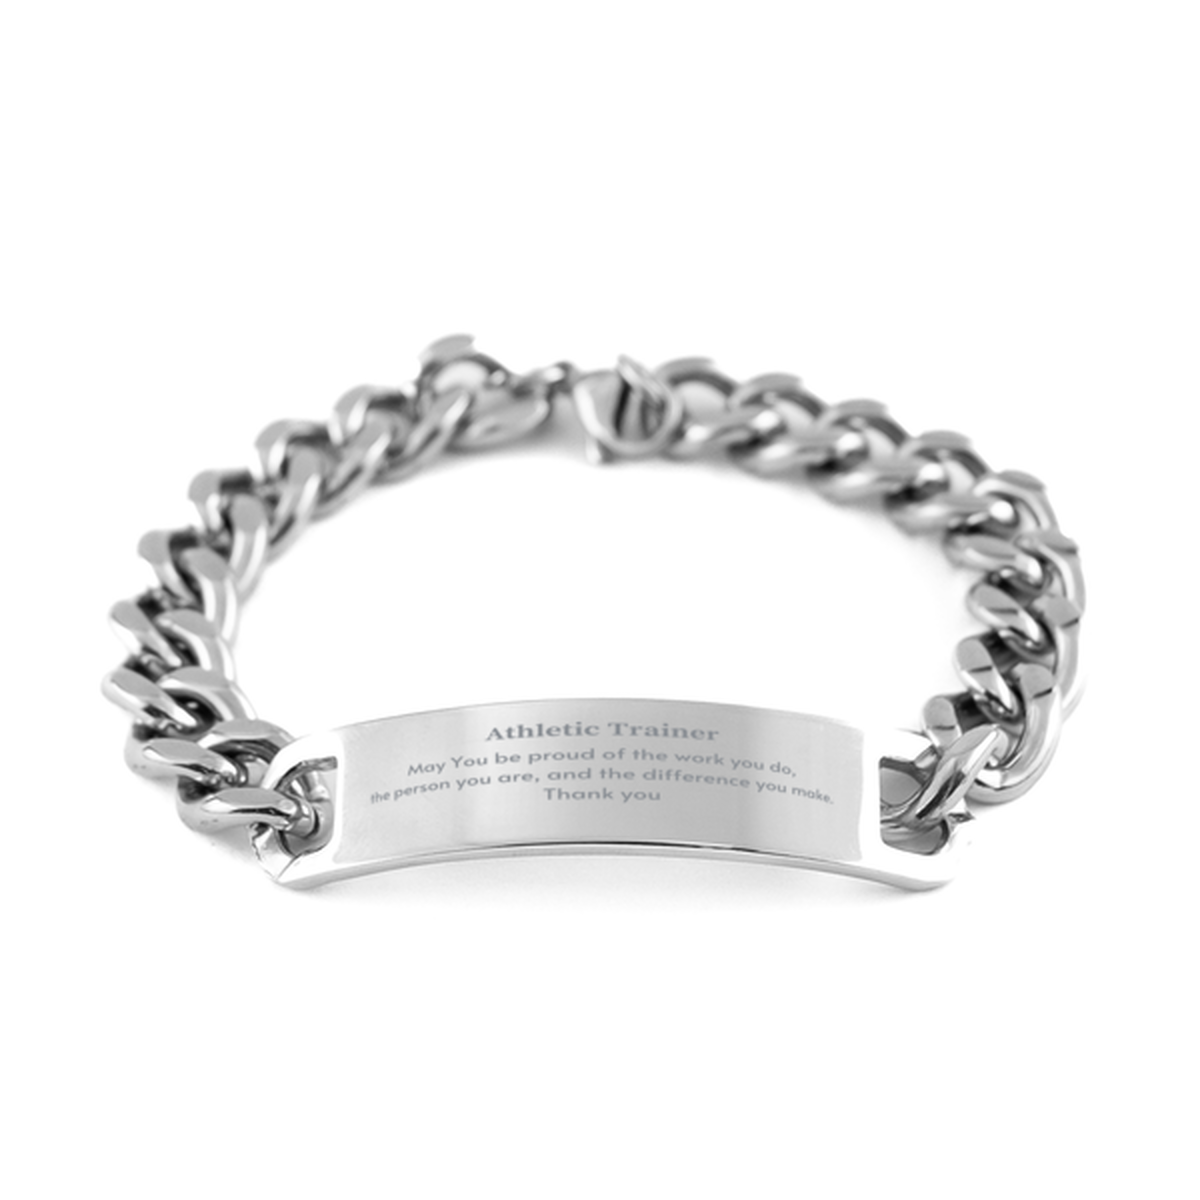 Heartwarming Cuban Chain Stainless Steel Bracelet Retirement Coworkers Gifts for Athletic Trainer, Athletic Trainer May You be proud of the work you do, the person you are Gifts for Boss Men Women Friends